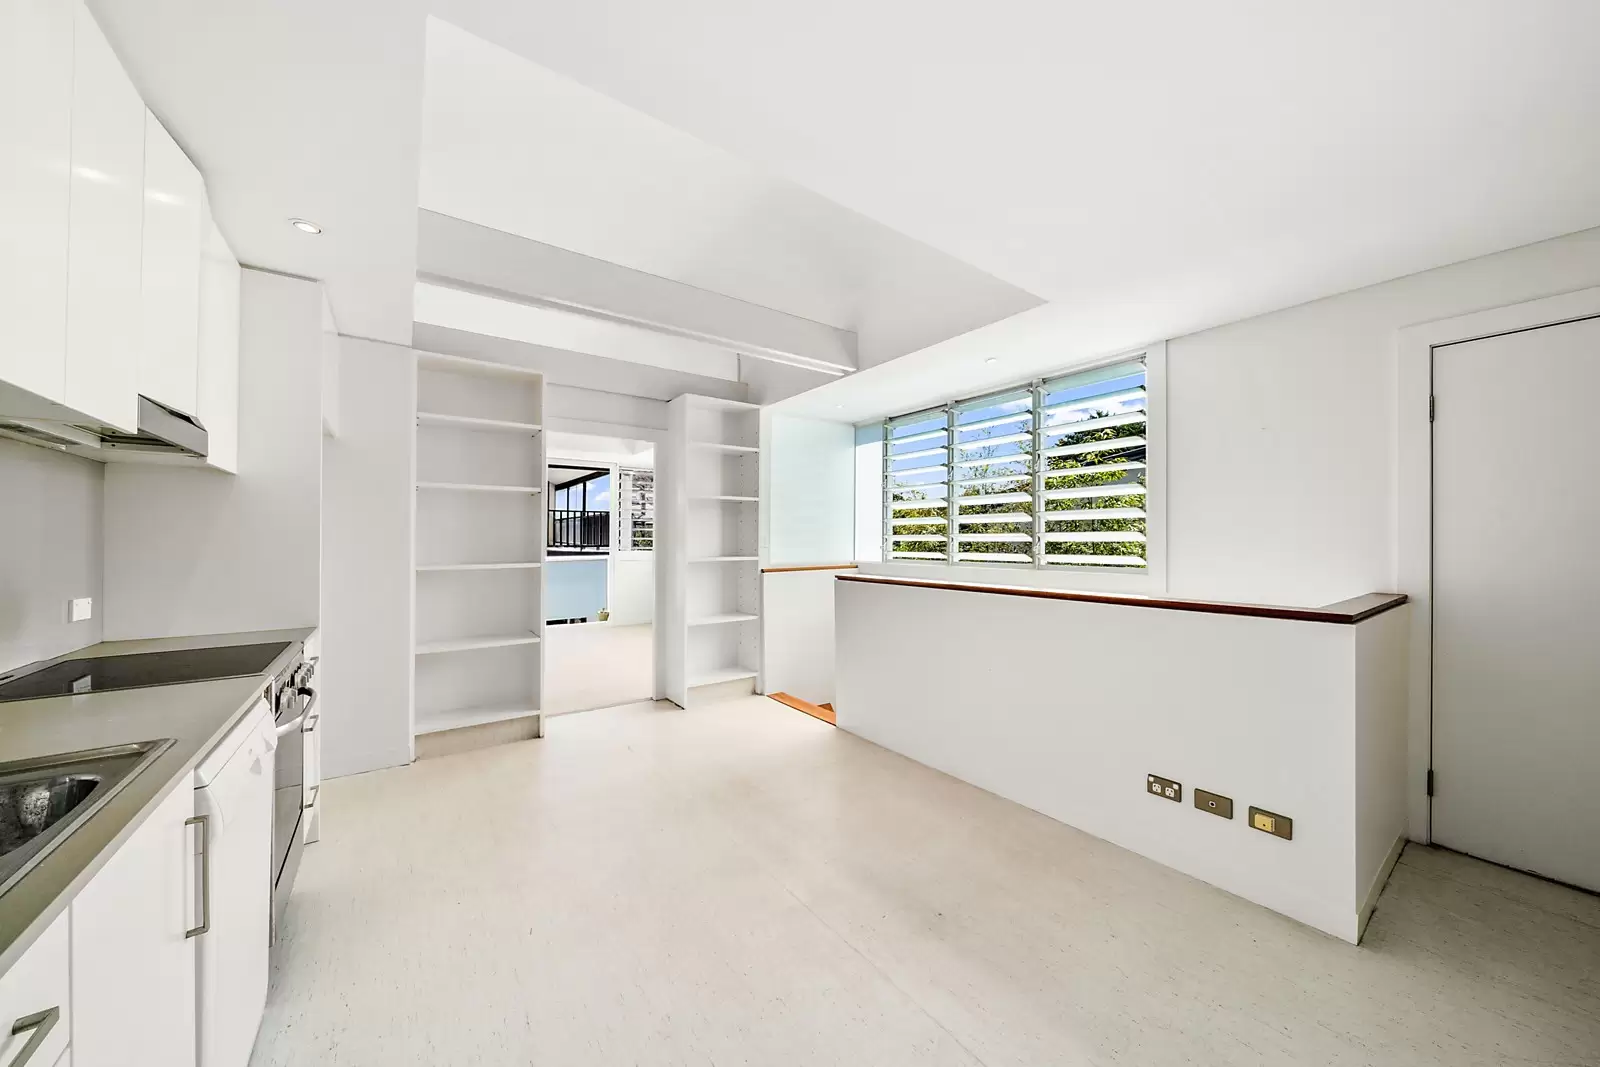 18 Glebe Street, Edgecliff Leased by Sydney Sotheby's International Realty - image 4